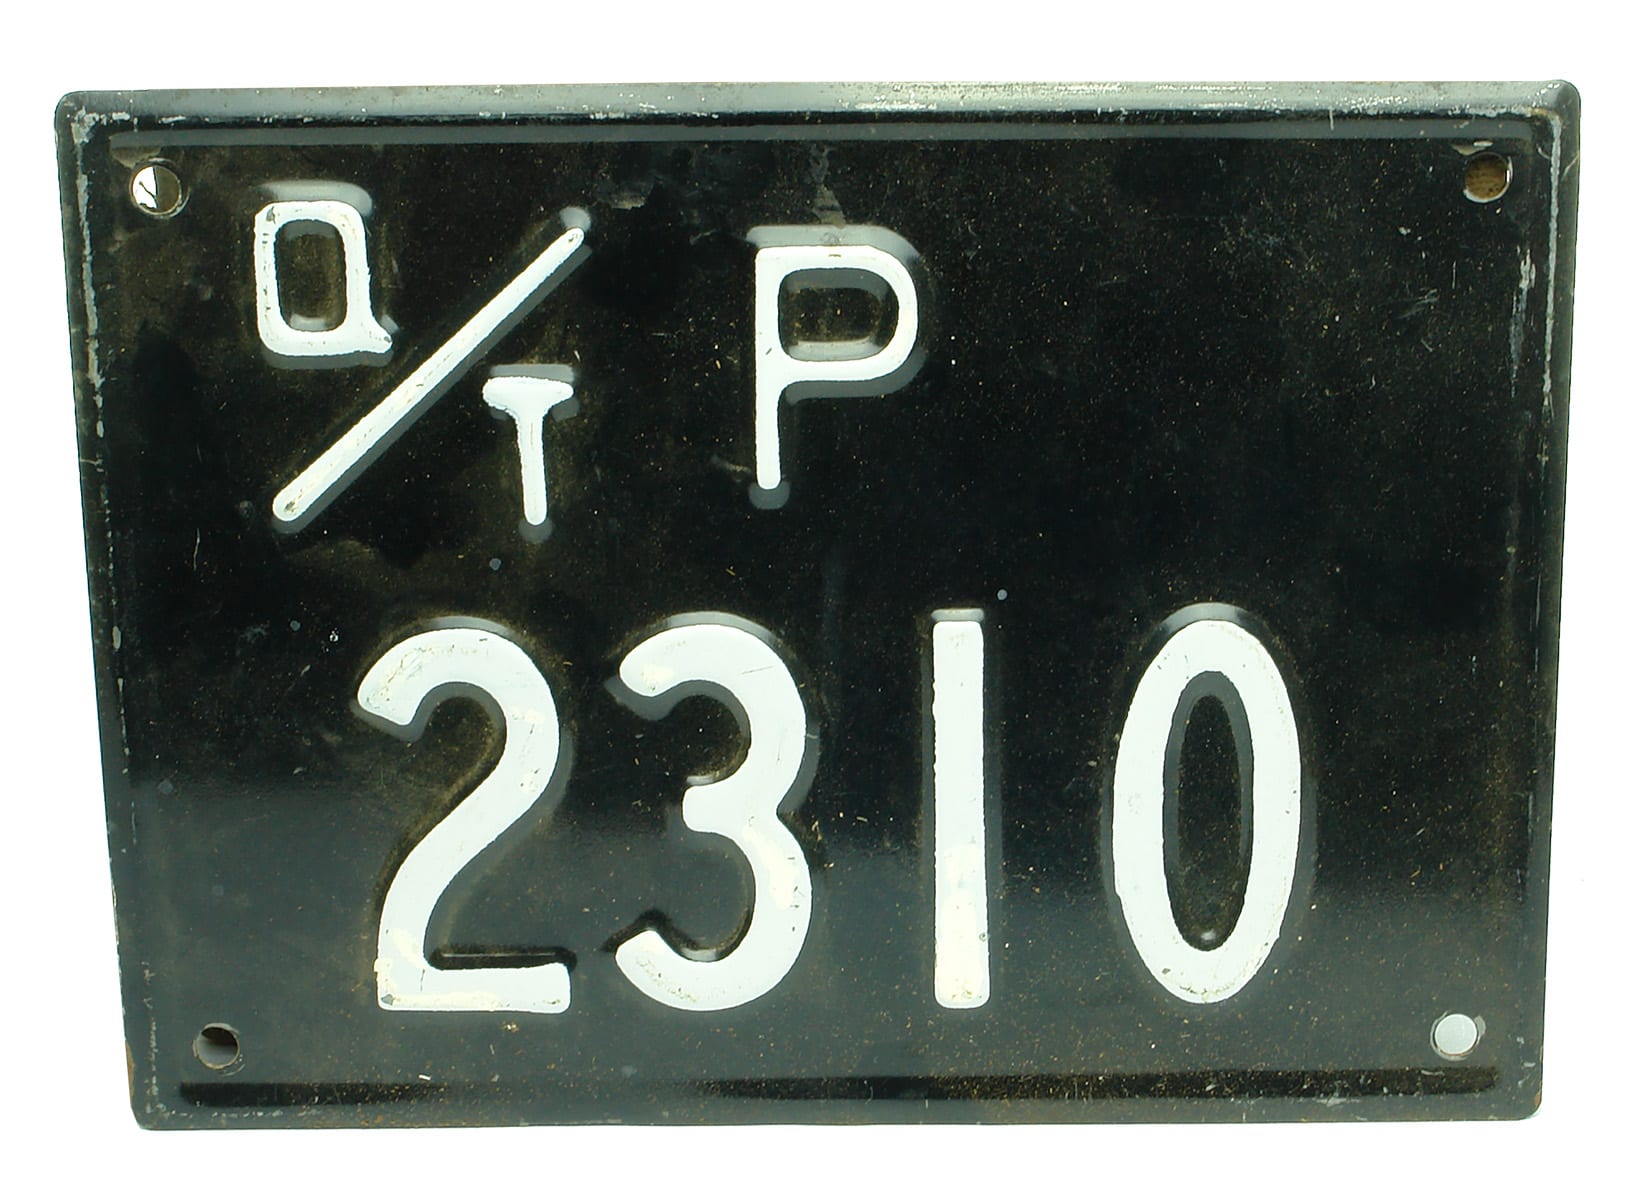 Historic Number Plate